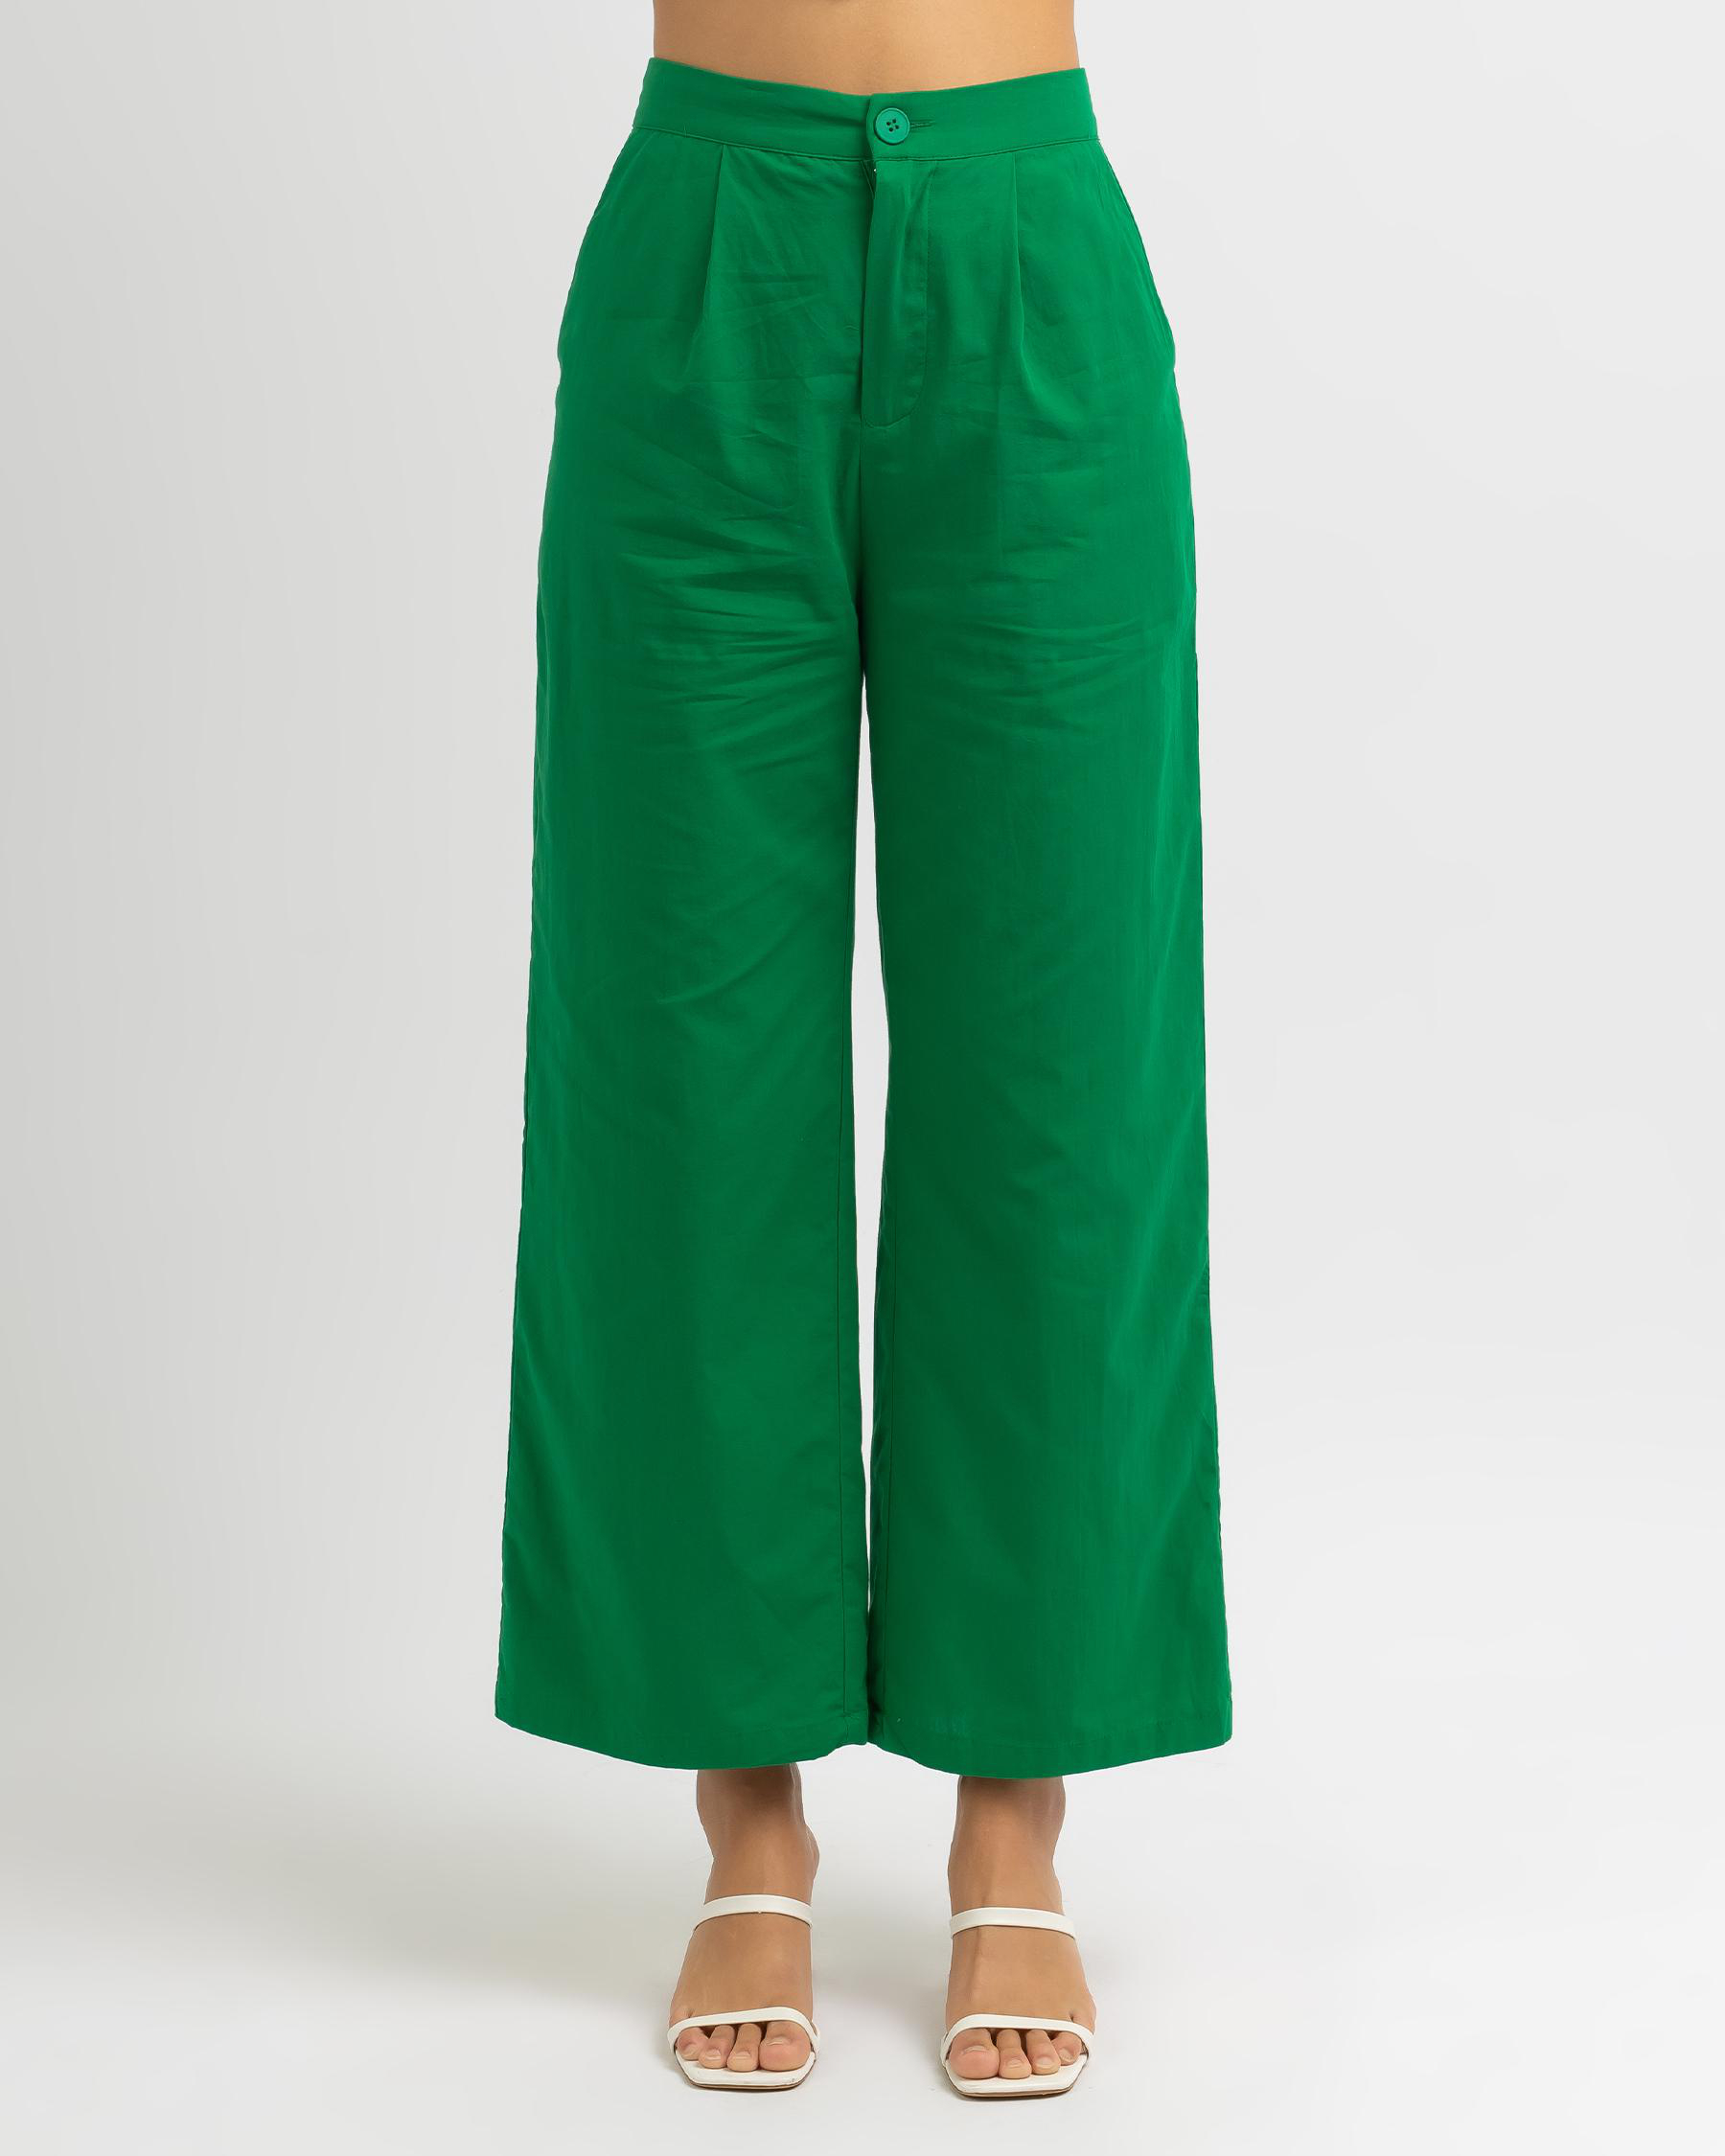 Winnie & Co So Fly Pants In Green - Fast Shipping & Easy Returns - City ...